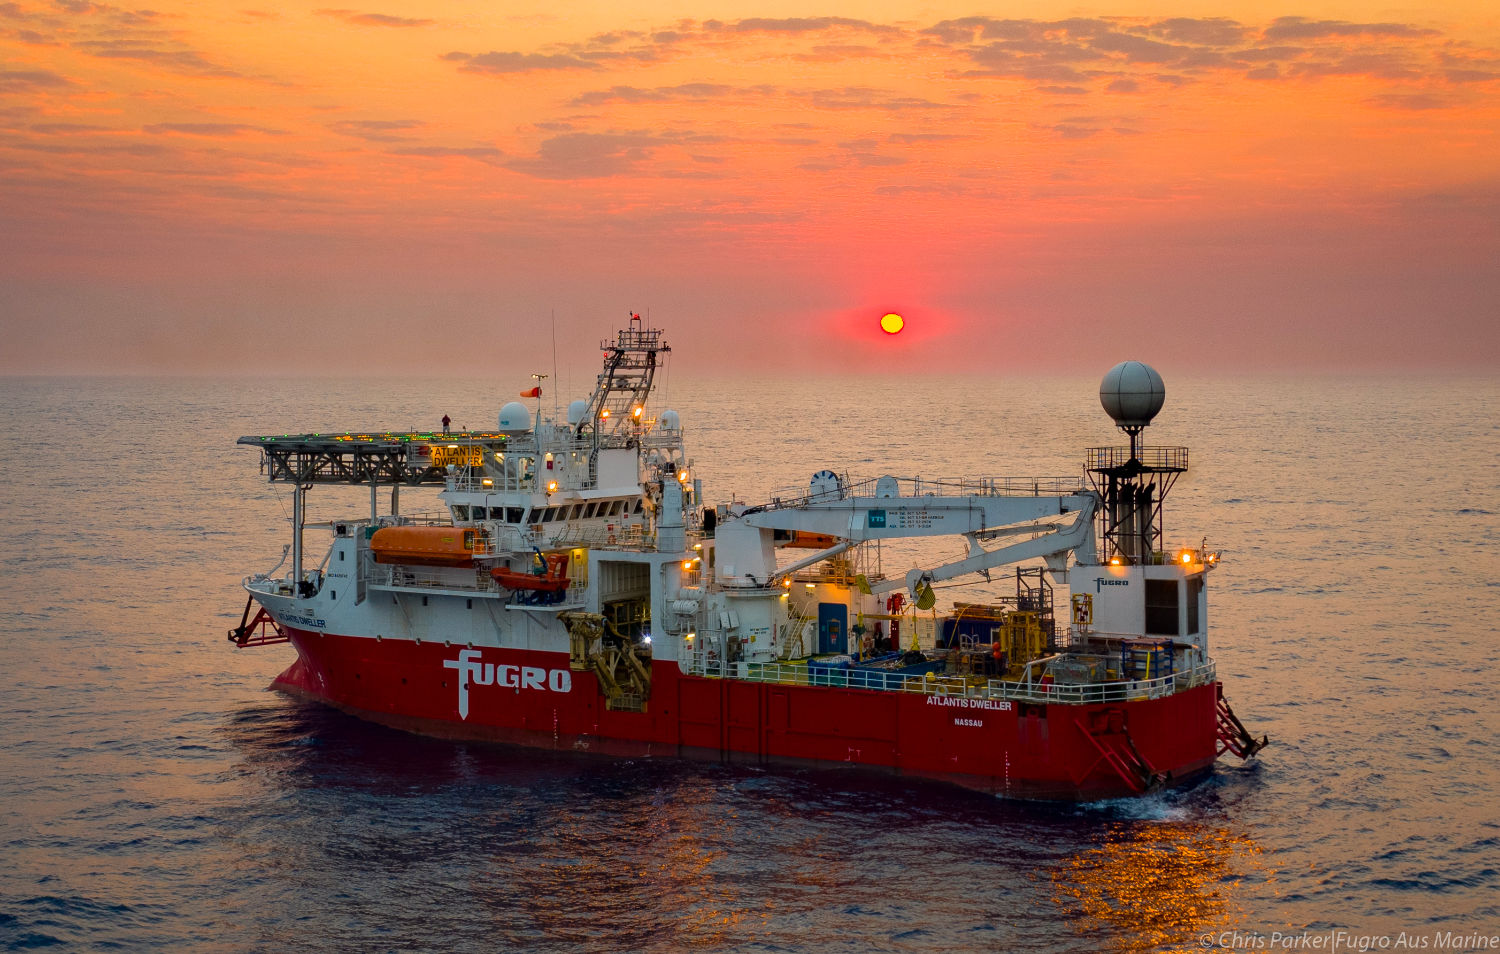 Global Maritime awarded Dynamic Positioning Assurance contract with Fugro